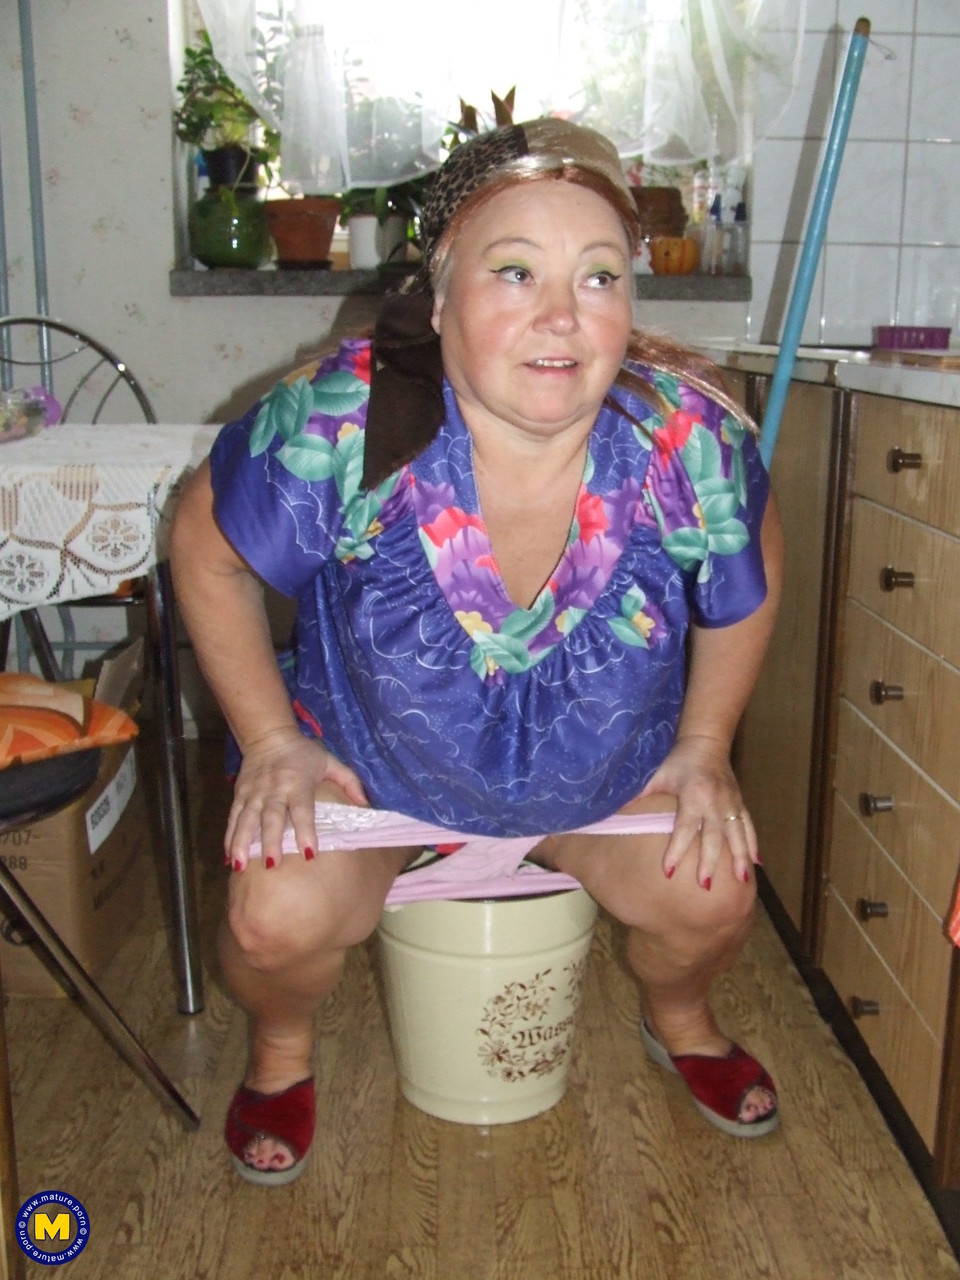 Fat granny Regina strips her clothes and poses while cleaning the kitchen 포르노 사진 #425872093 | Mature NL Pics, Regina, Mature, 모바일 포르노